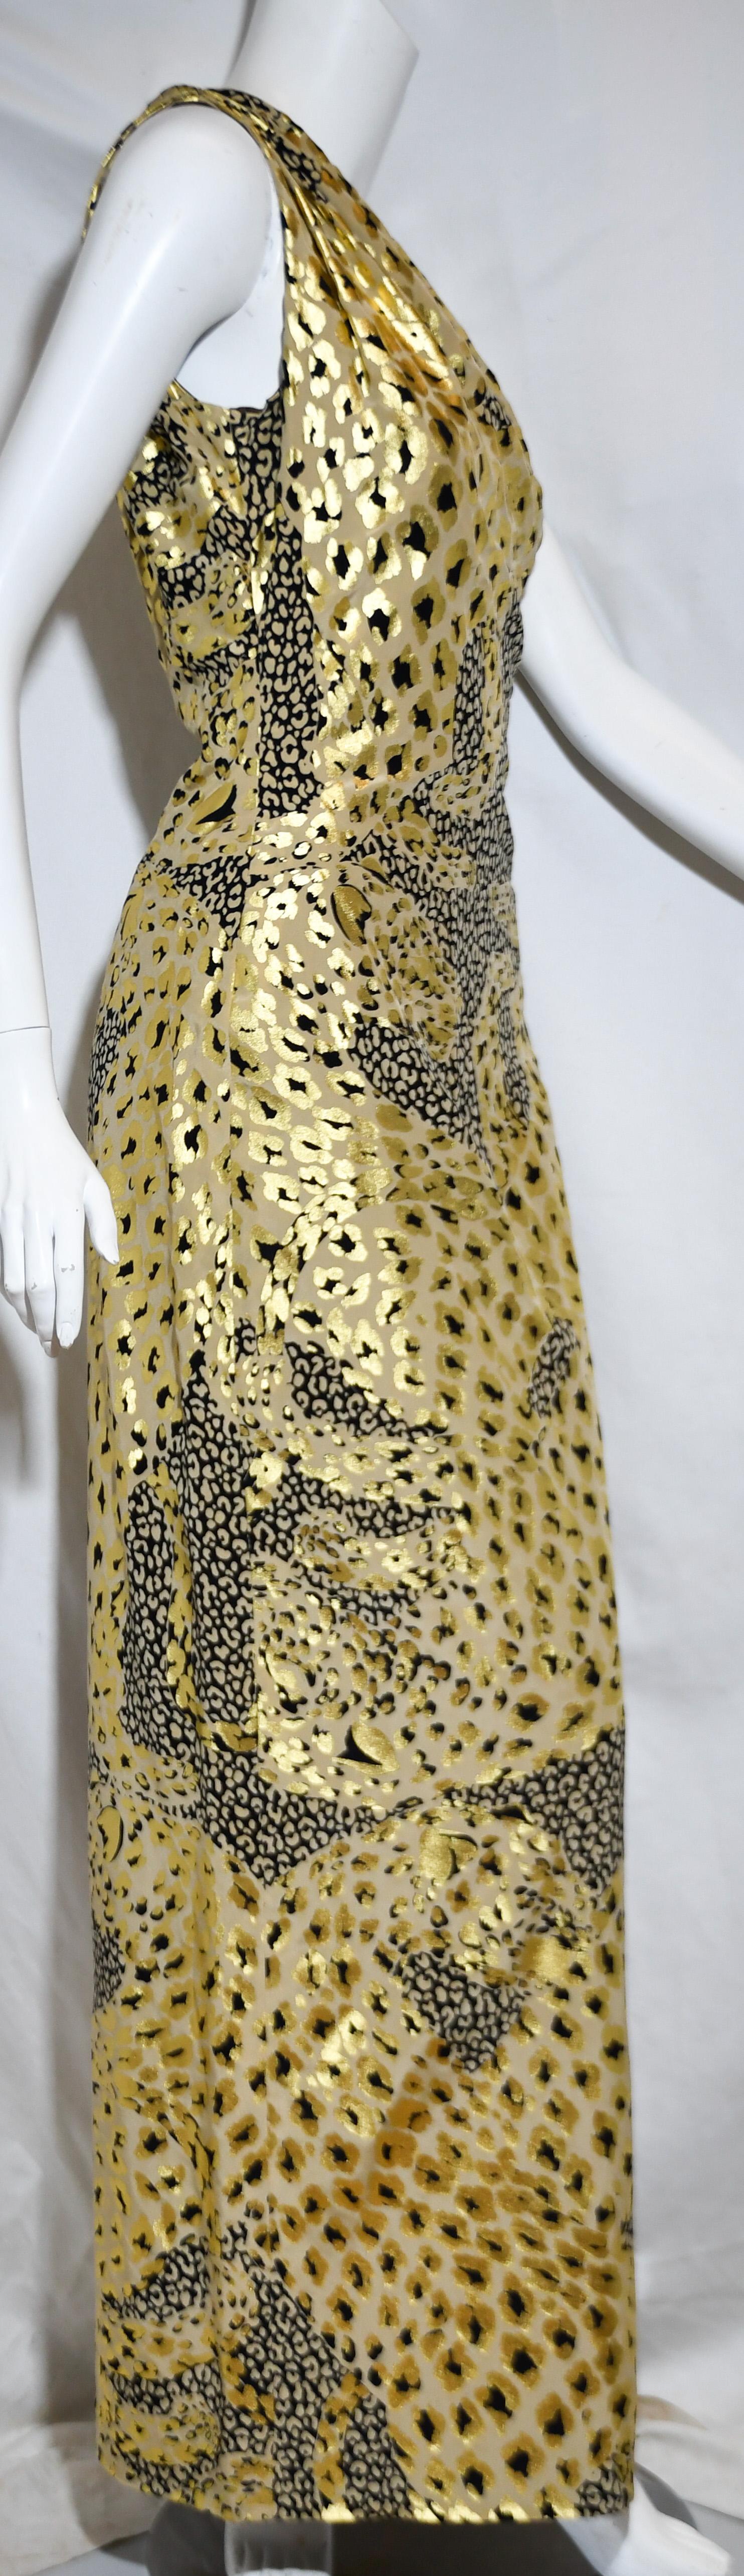 Yves Saint Laurent Rive Gauche metallic gold and black leopard print long evening gown is gathered at one shoulder and drapes across the front of the bust and, also, at the back.  Gown includes a side zipper for closure and a side slit.  The leopard